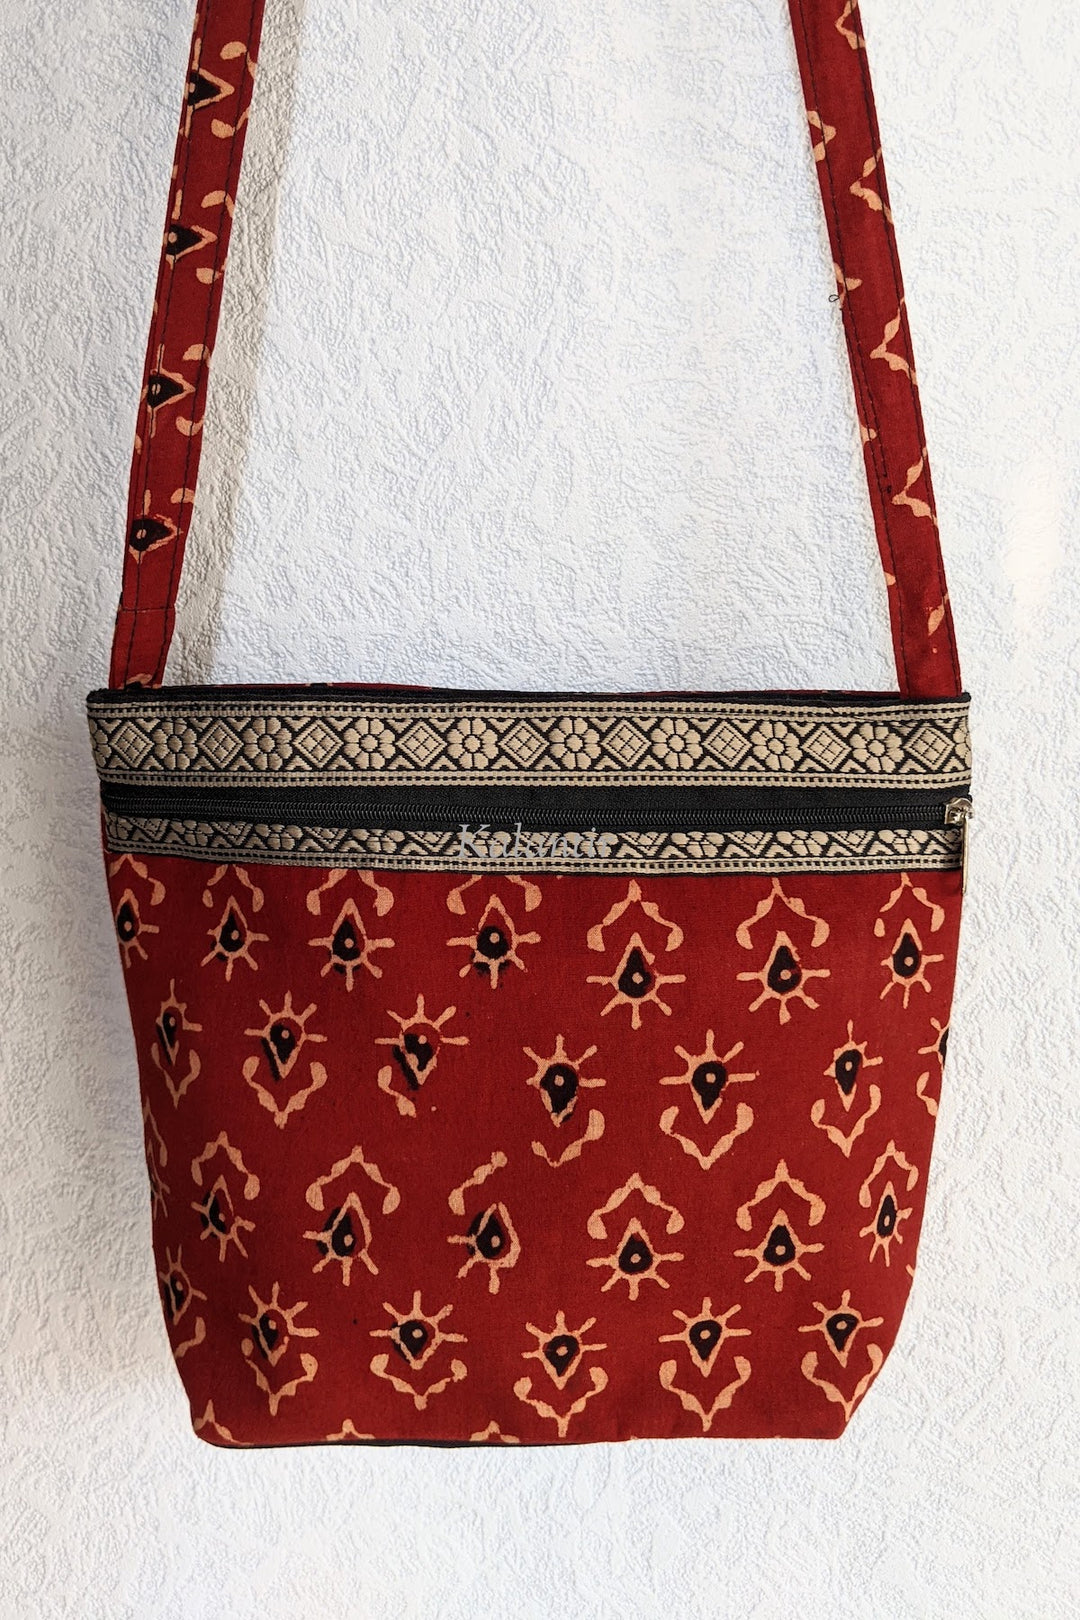 Closer view of the Casual Block Printed Colored Sling Bag in Cinnabar Red